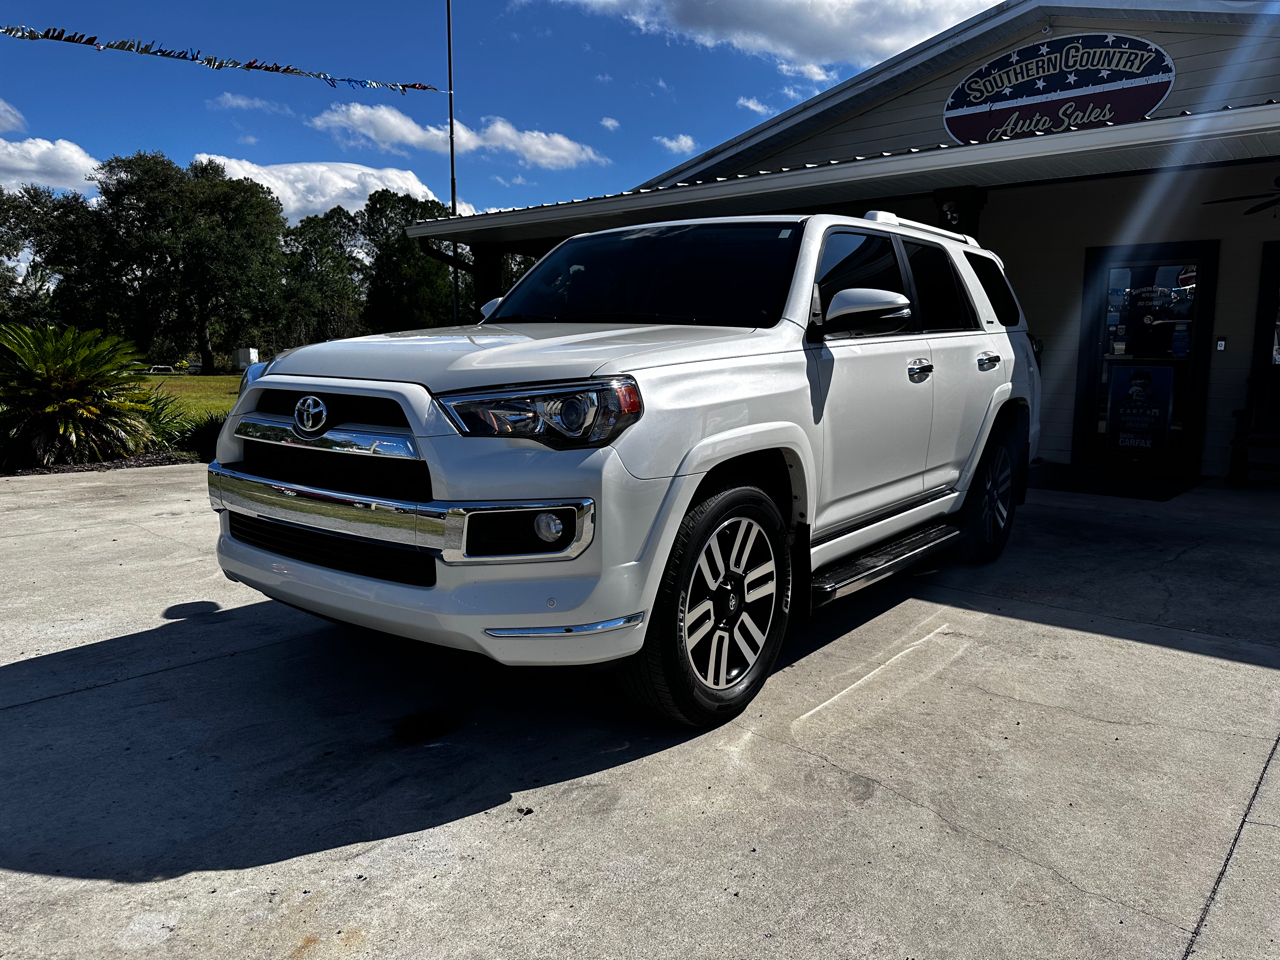 Toyota 4Runner 4dr Limited 3.4L Auto 4WD (Natl) 2016